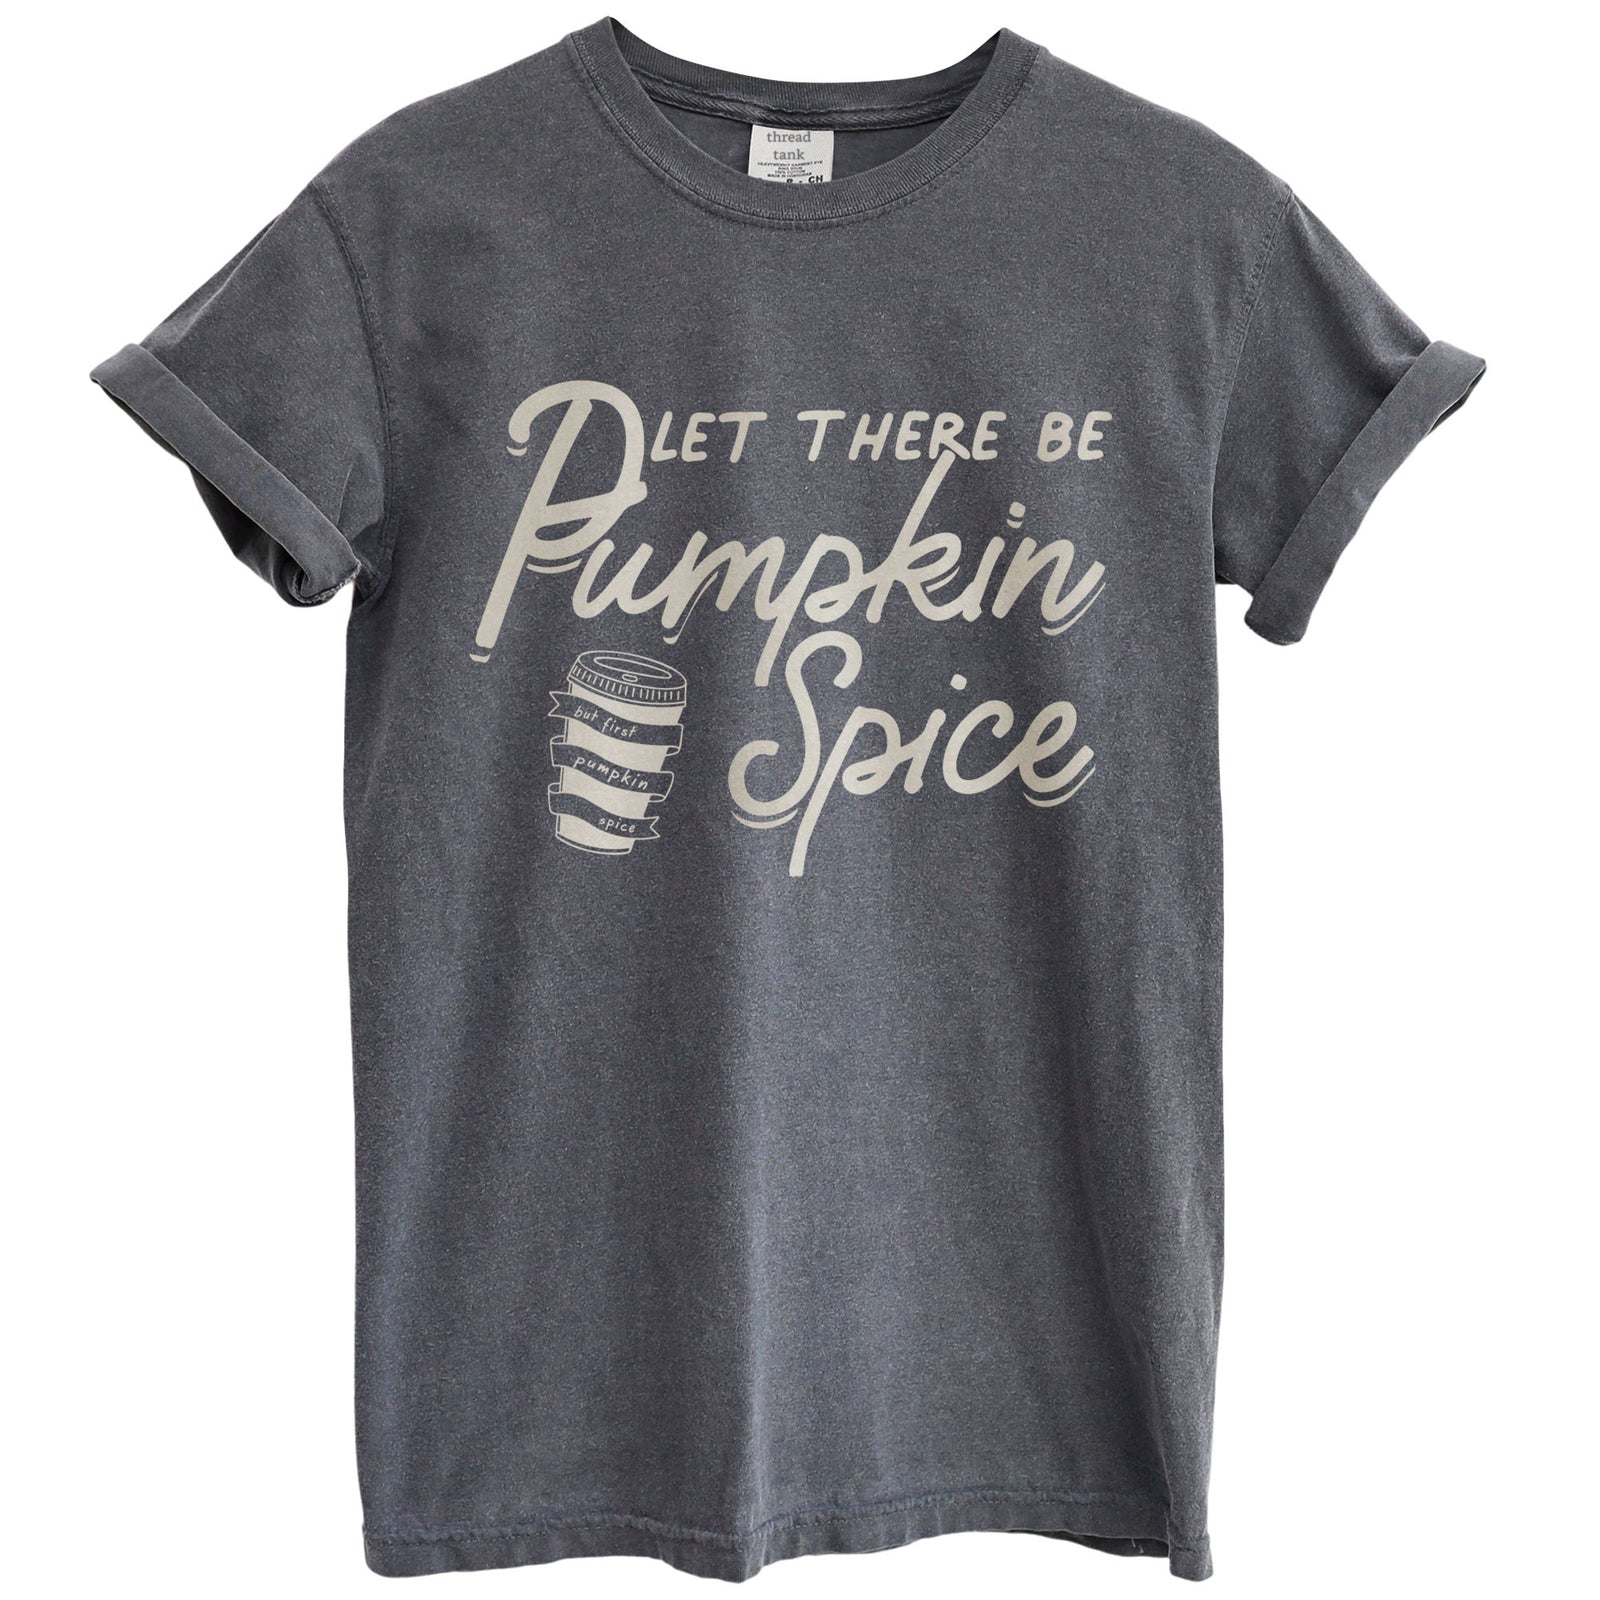 let there be pumpkin spice oversized garment dyed shirt